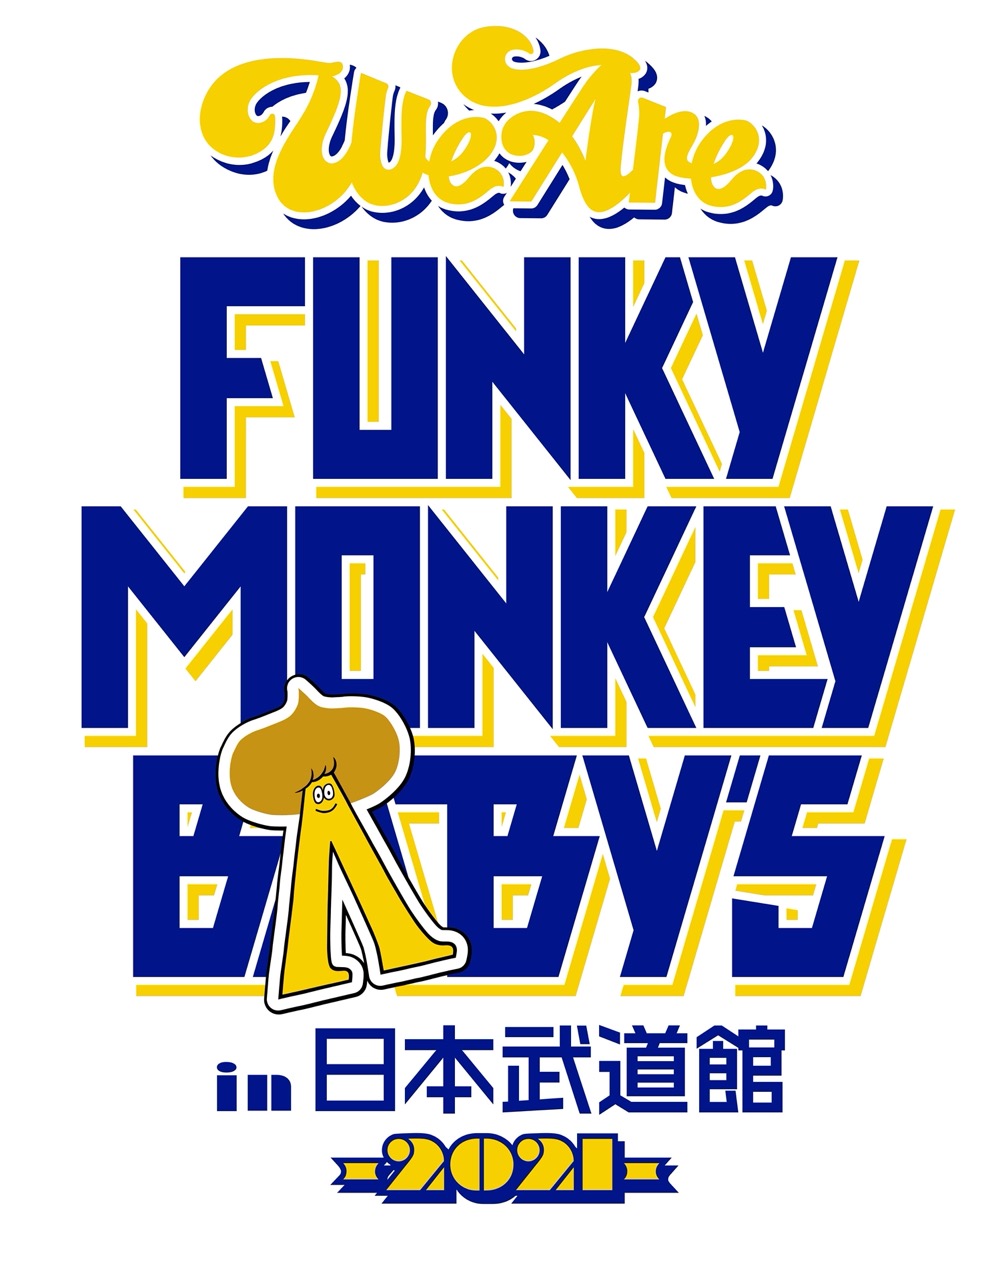 FUNKY MONKEY BΛBY’S、復活作となる1stシングルが9月リリース決定 - 画像一覧（1/3）